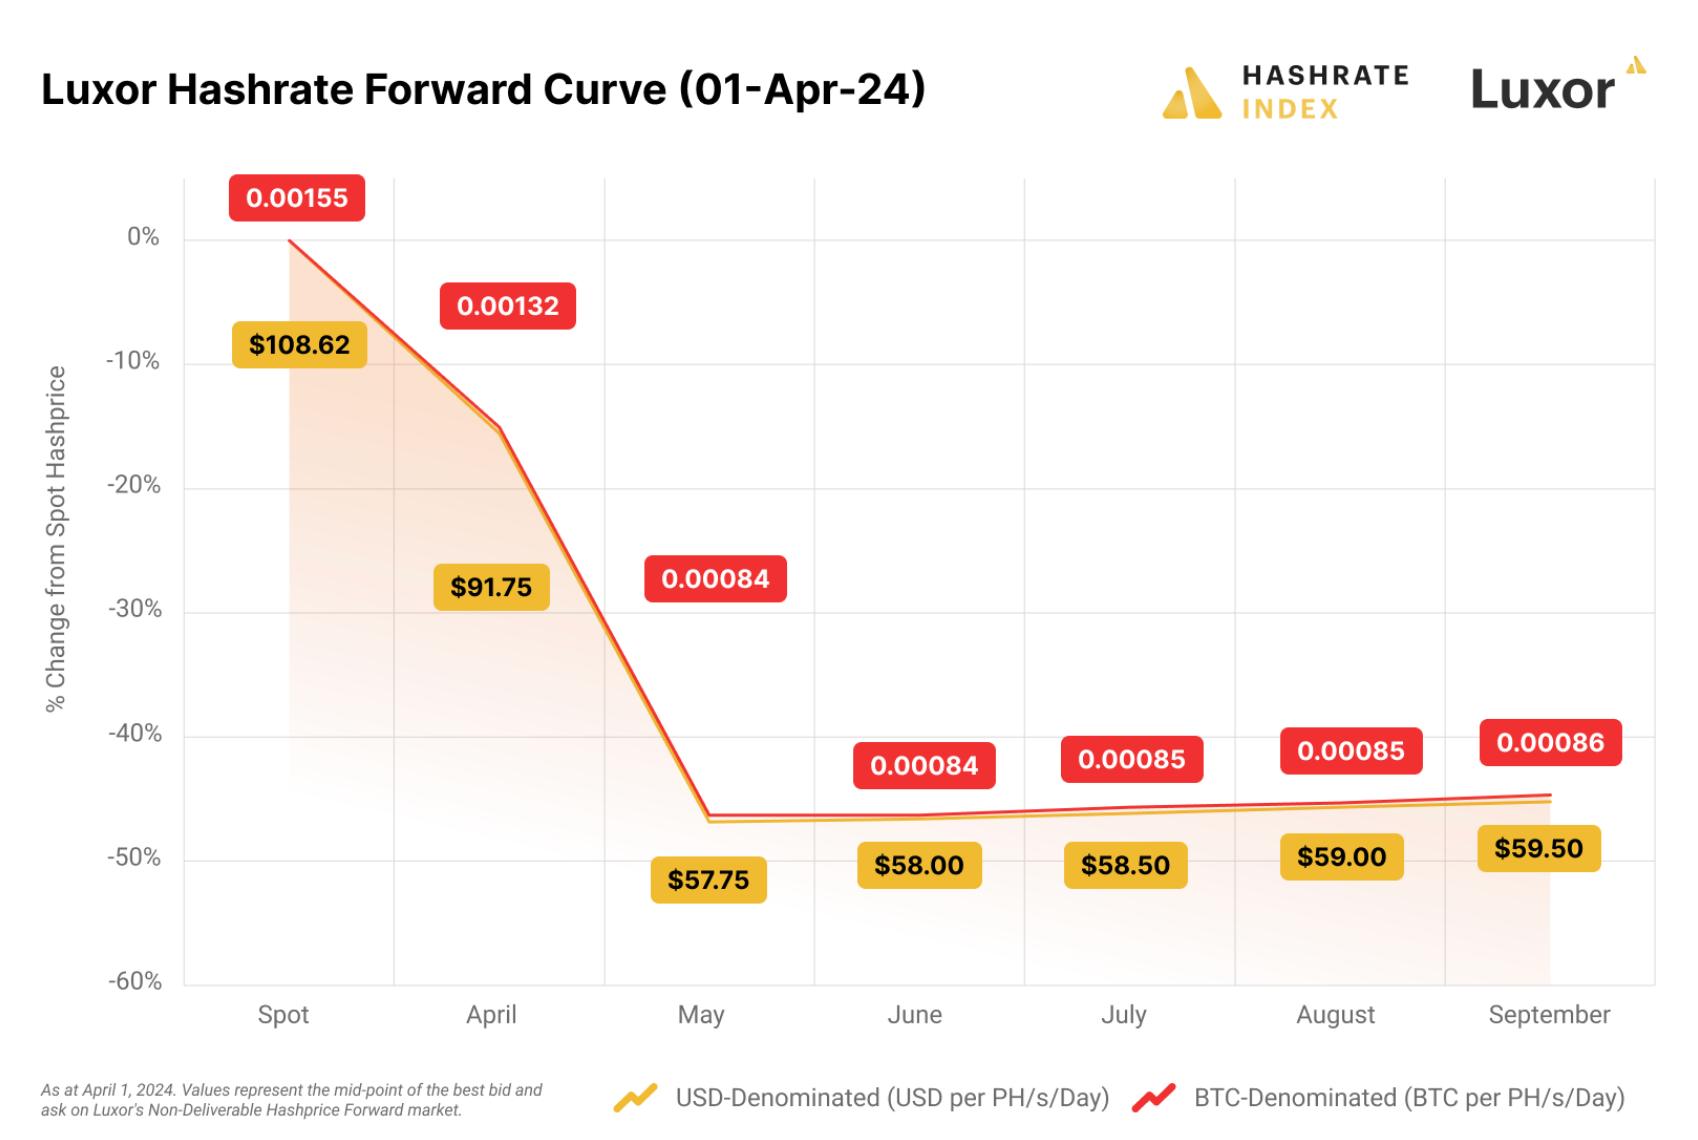 Luxor Hashrate Forward Curve for the week of April 1, 2024 | Source: Luxor Derivatives Desk